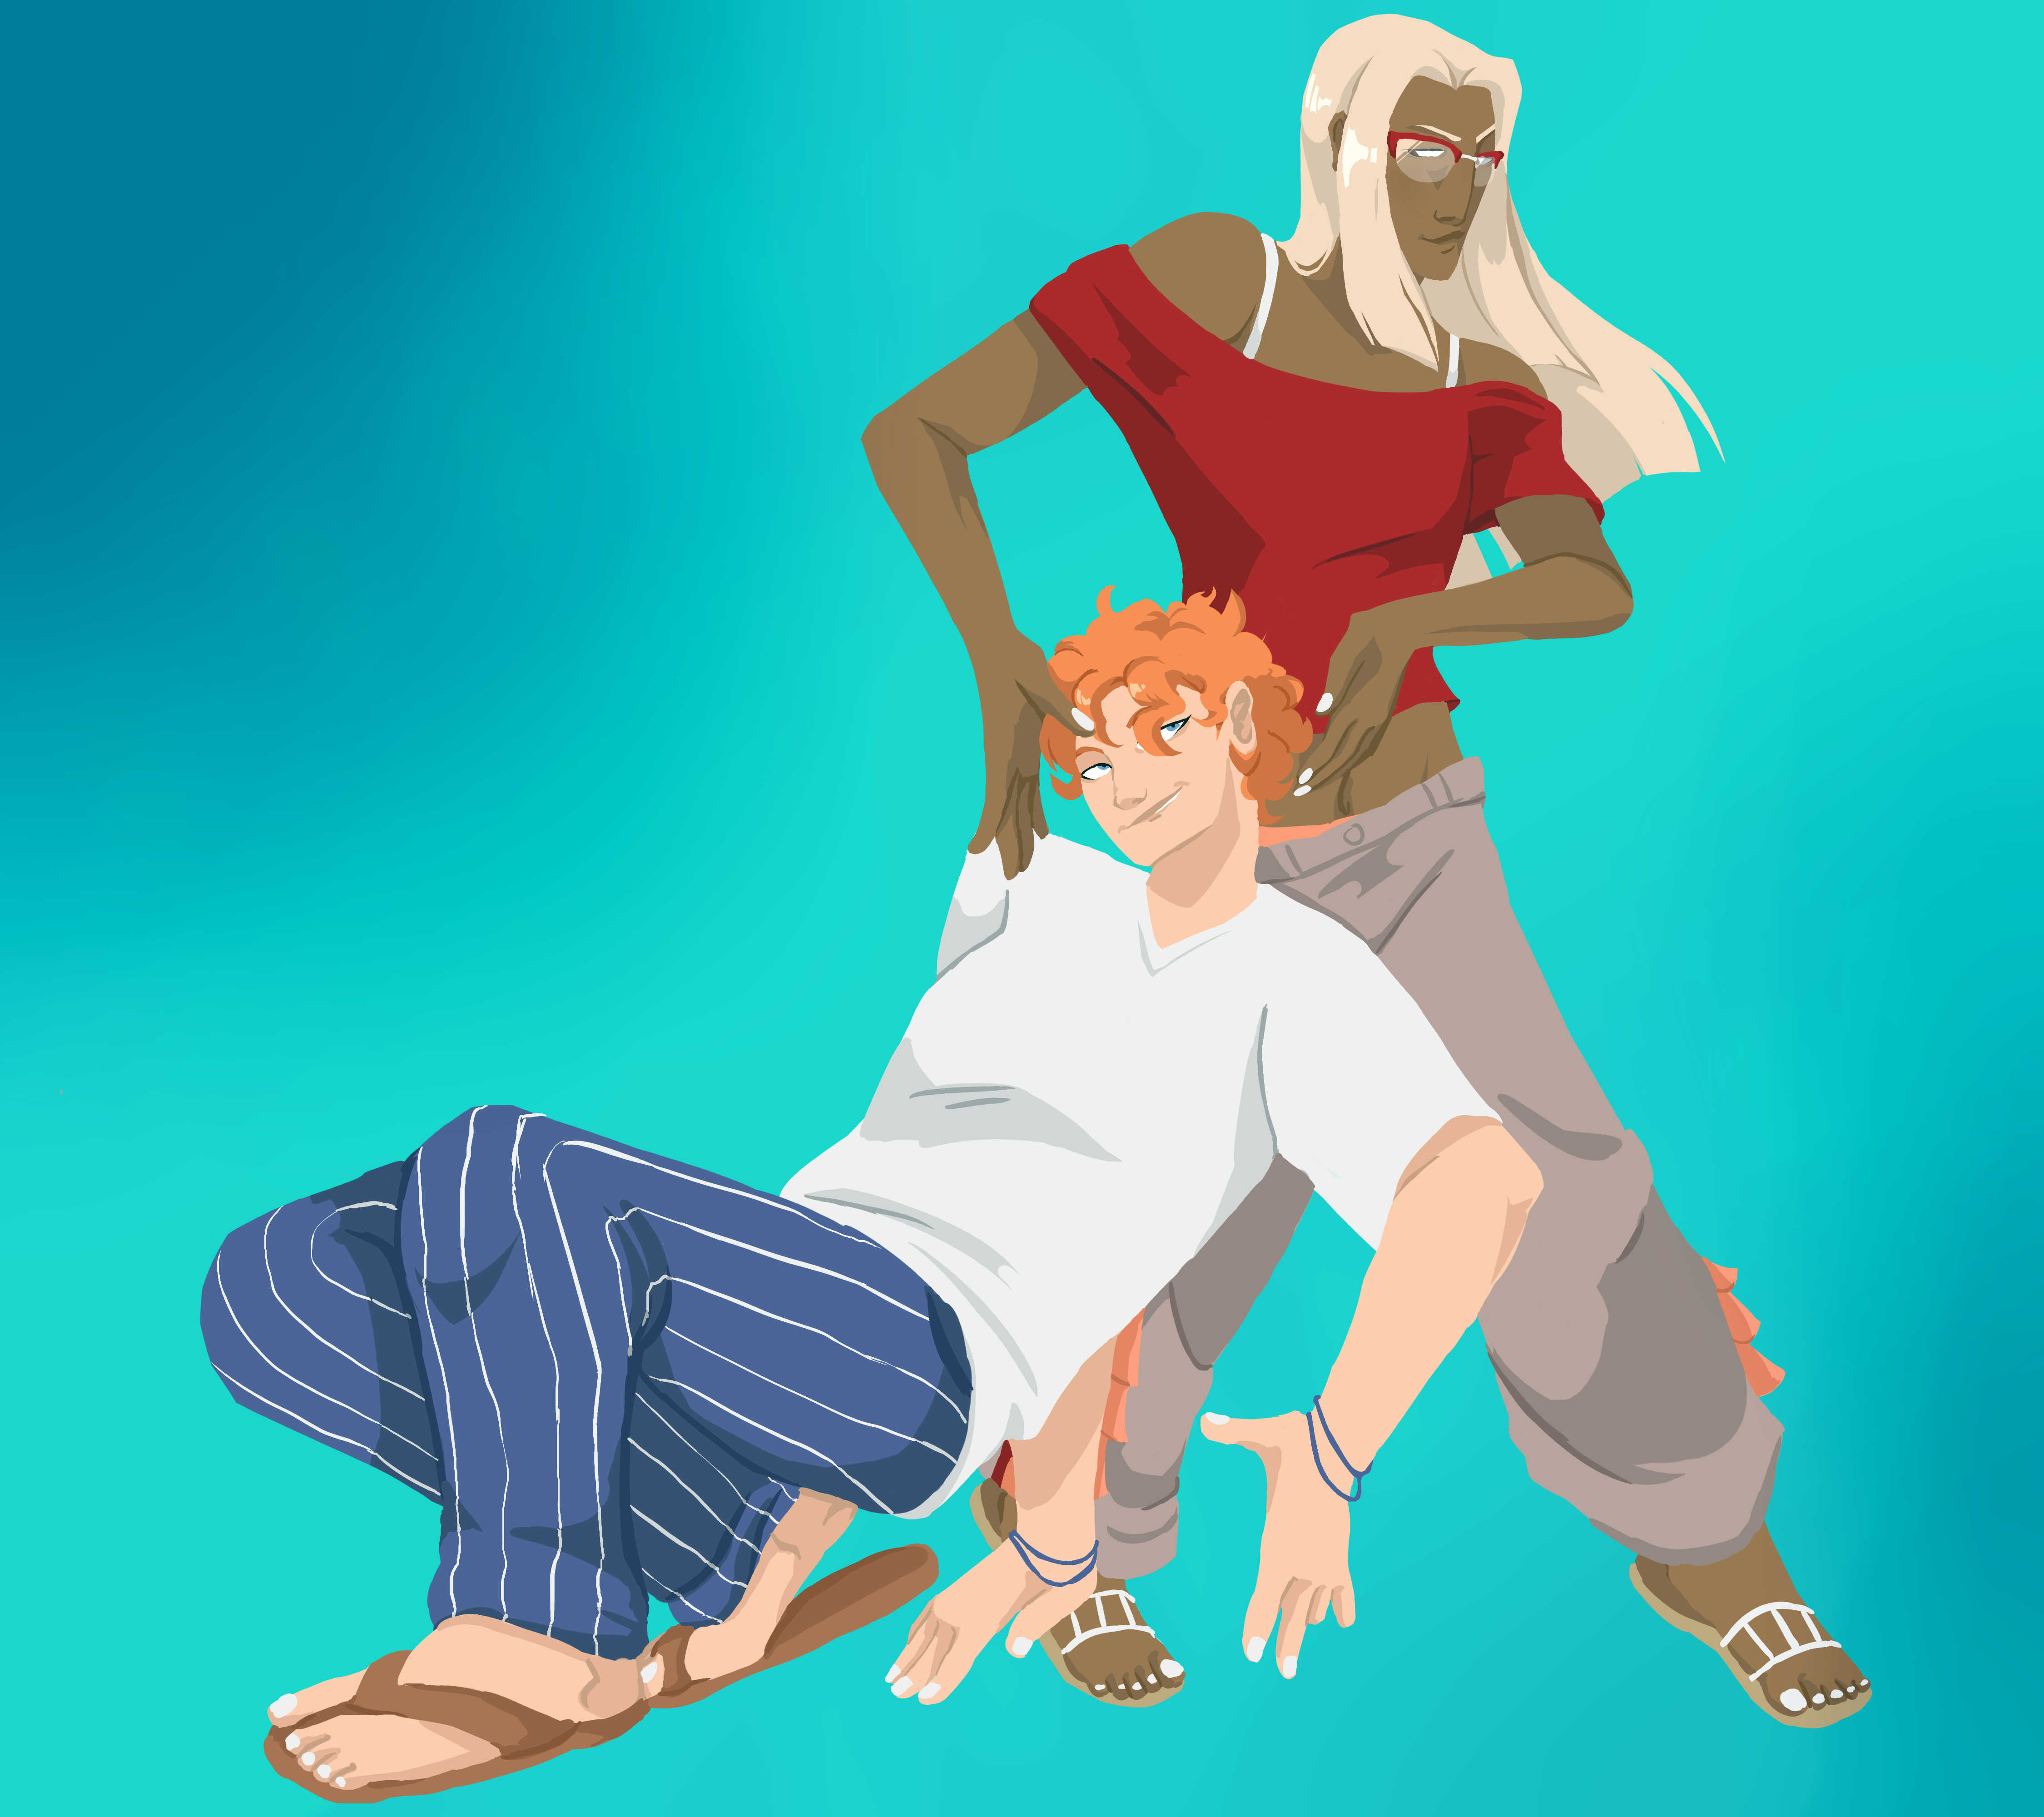 a drawing of Squalo and Tiziano from Jojo's Bizarre Adventure: Vento Aureo. Squalo is posing low to the ground, while Tiziano frames Squalo's face with his hands. Squalo is wearing a white t-shirt, blue striped pants that resemble his canonical jumpsuit, and brown flipflops; Tiziano is wearing browline glasses, a red off-shoulder crop top with white straps underneath, baggy grey pants with salmon colored frills, and white sandals. Both Squalo and Tiziano's nails are painted white. Squalo is missing two fingers on his left hand